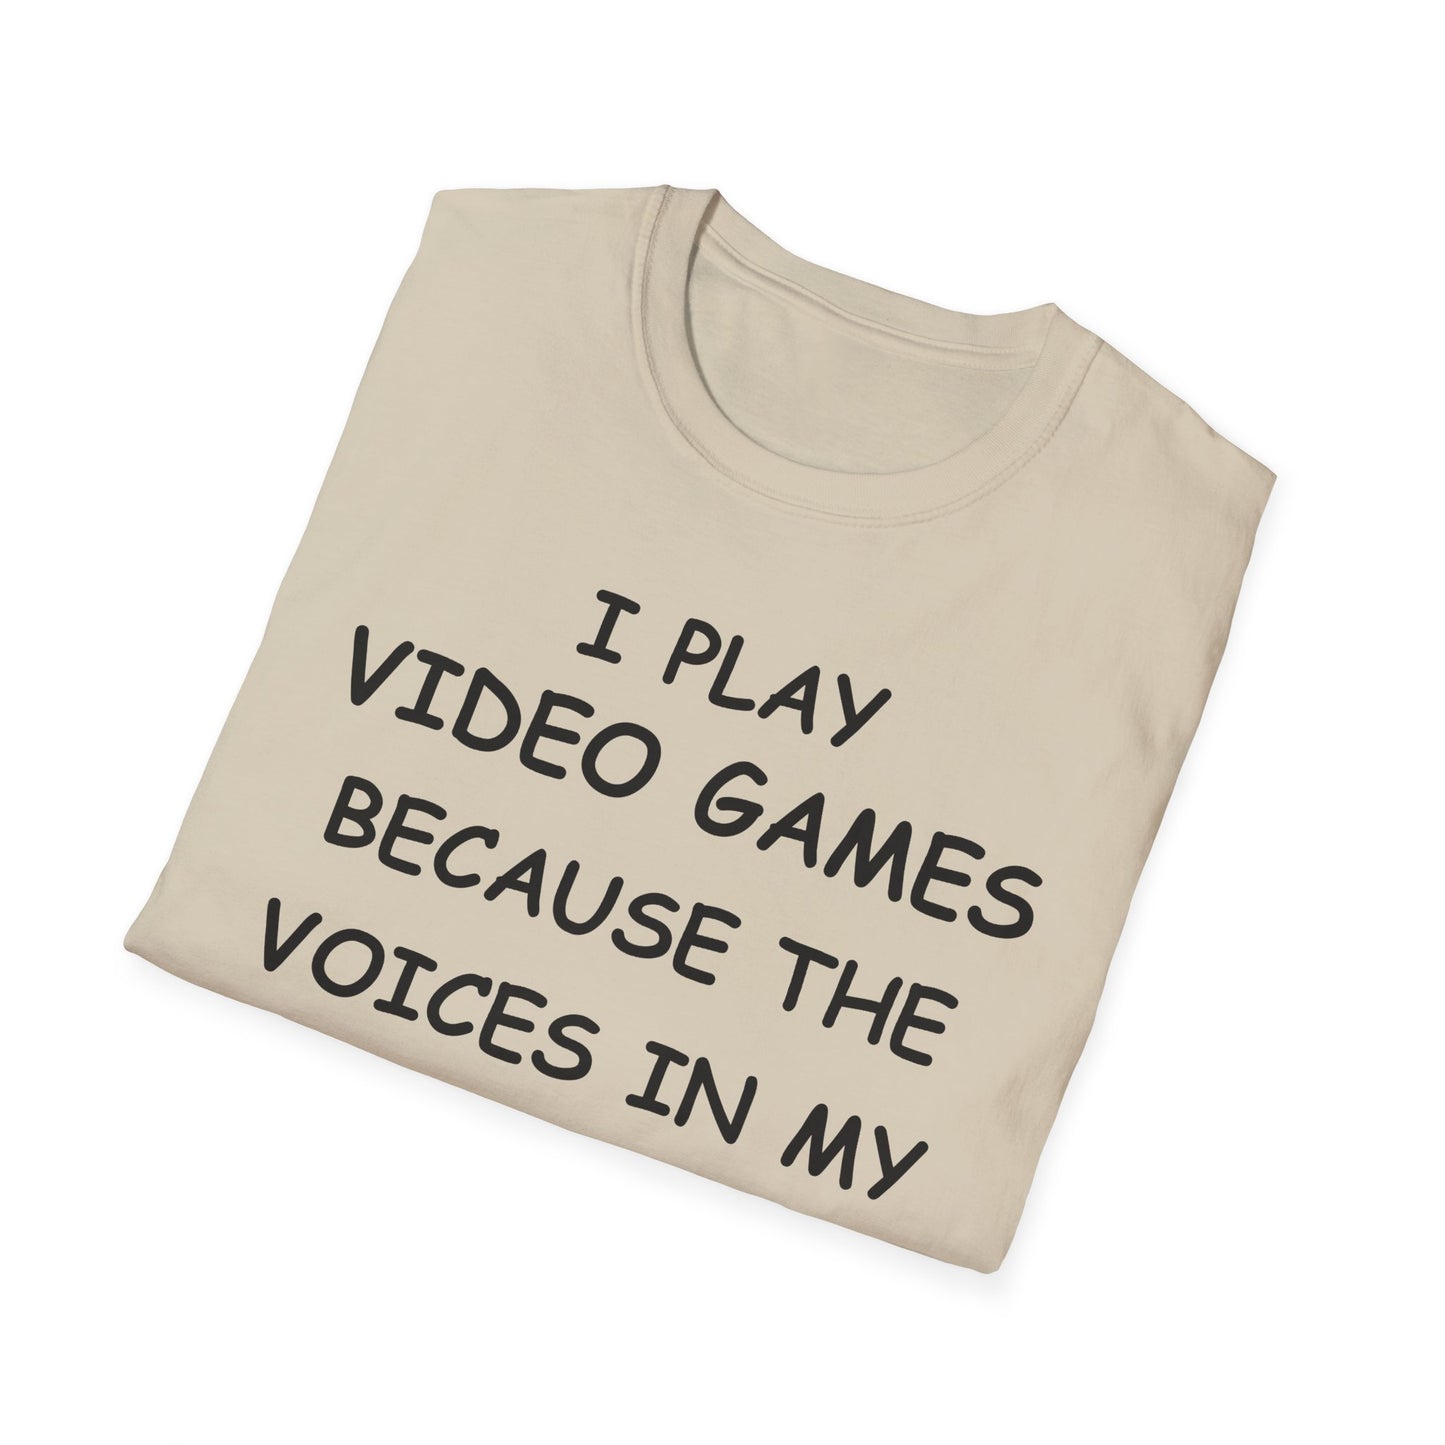 I Play Video Games - Black - Unisex Softstyle T-Shirt